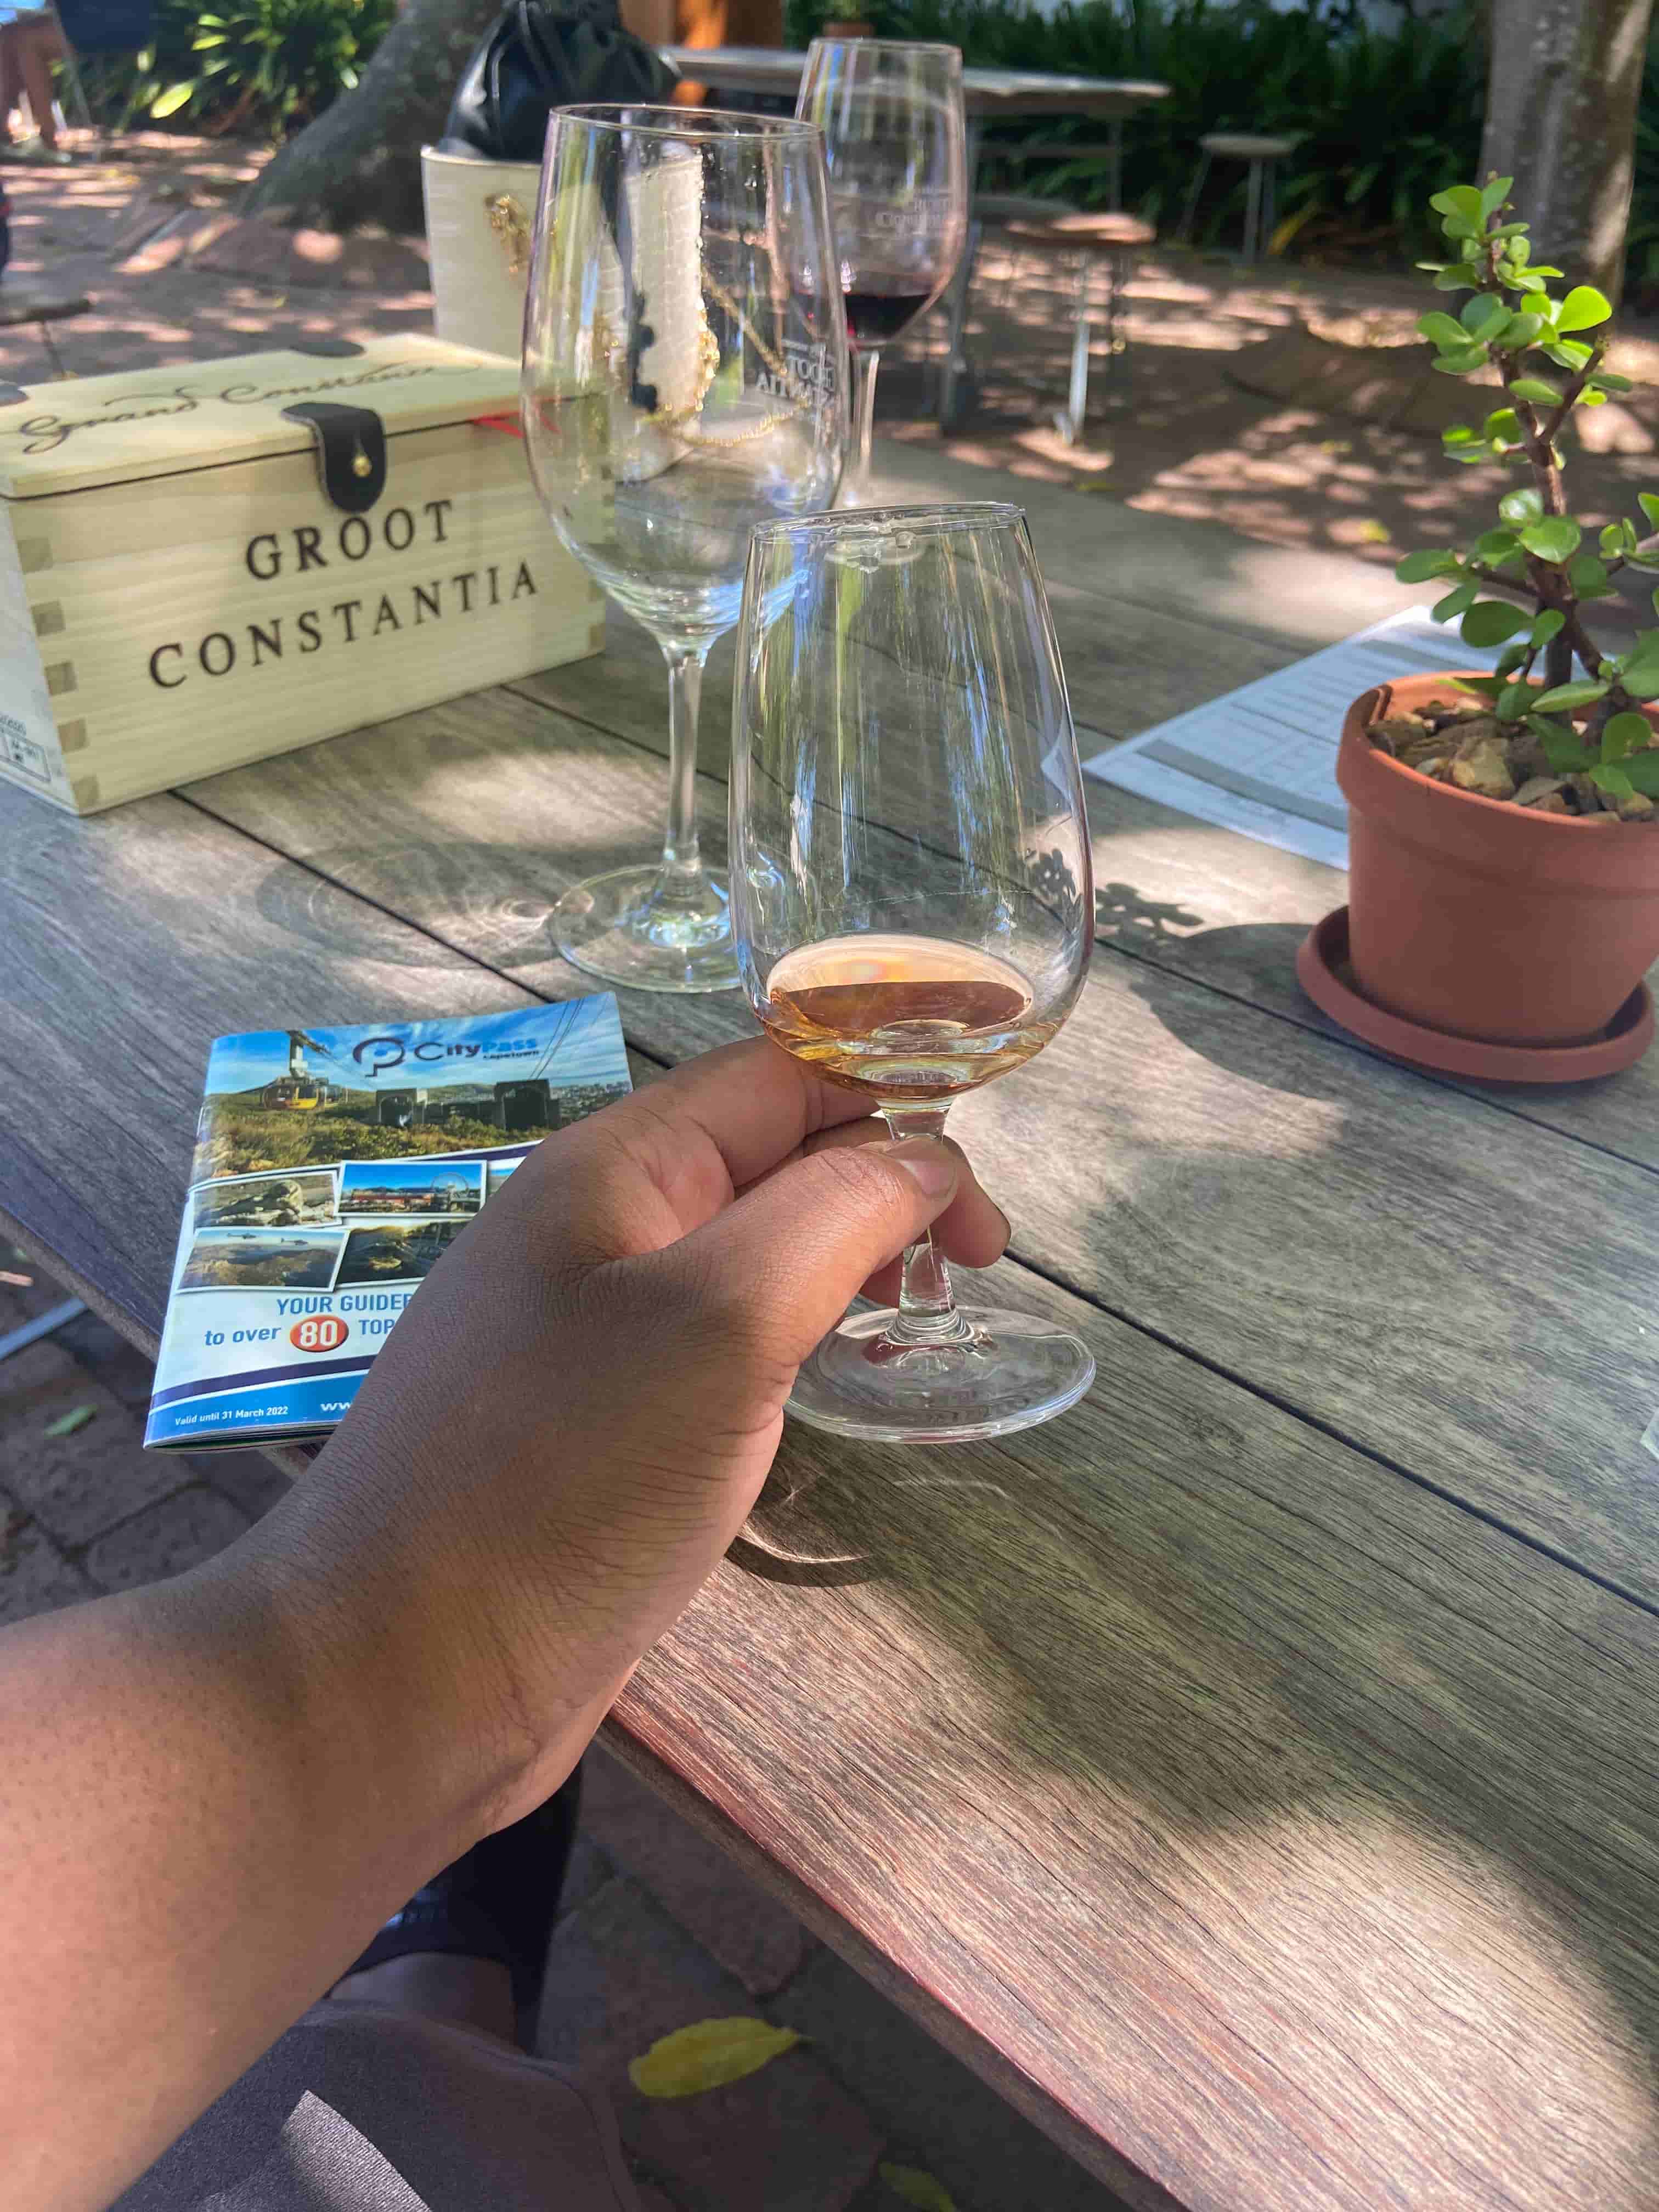 Holding out a glass of orange-pinkish wine on a park bench with a box saying Groot Constantia in the background